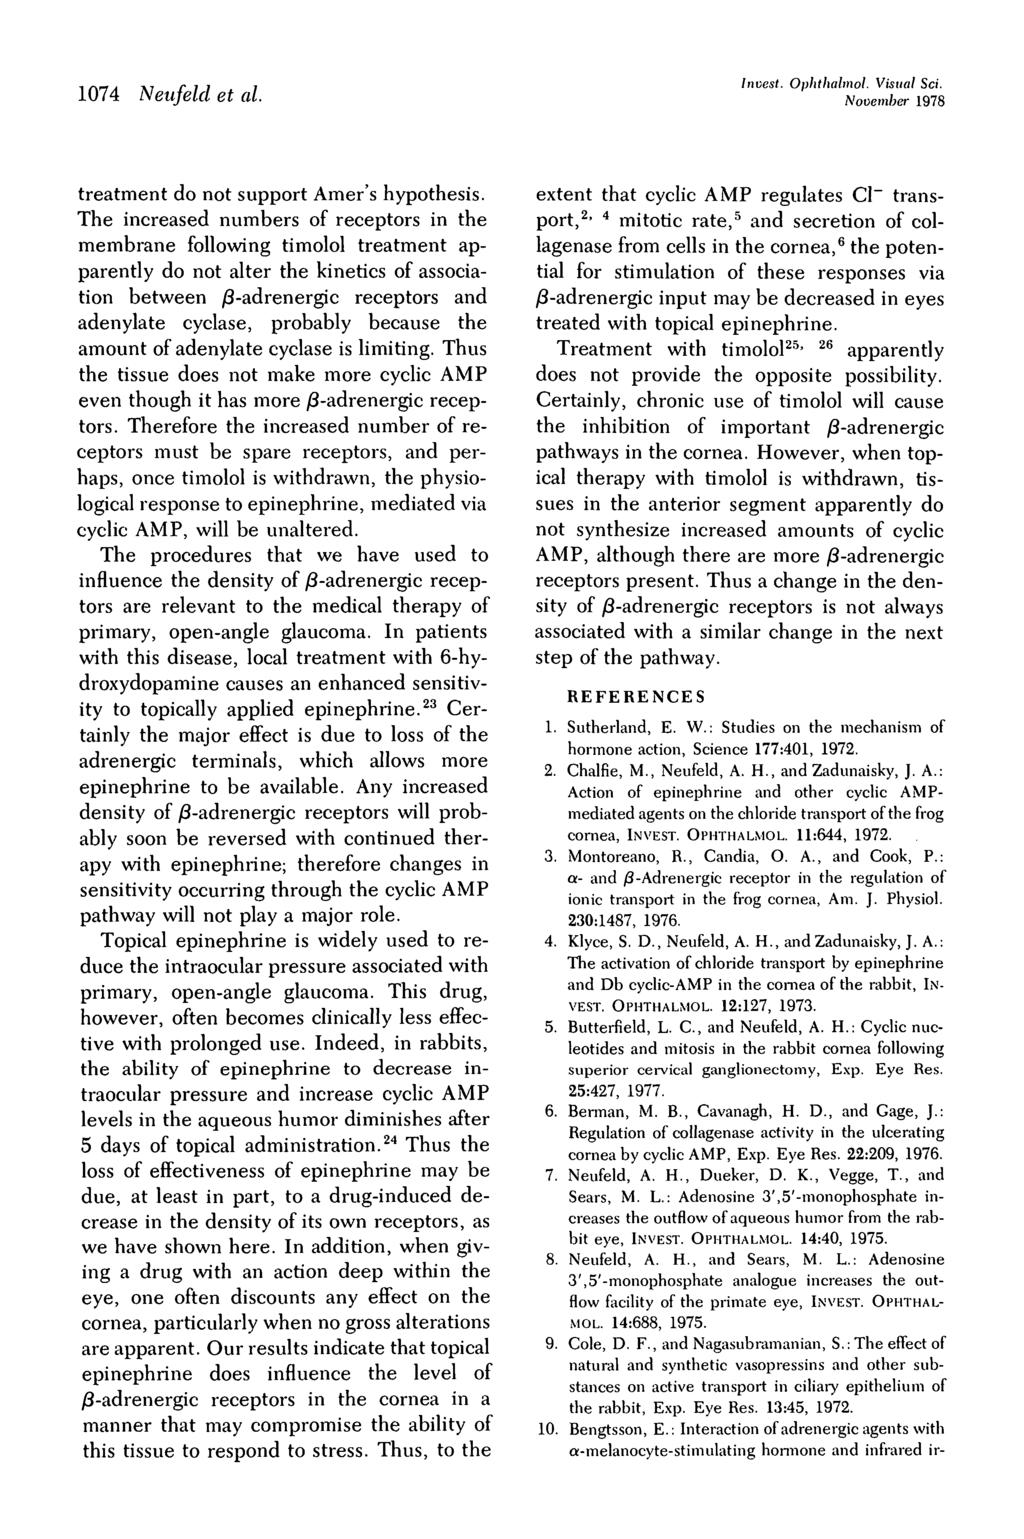 1074 Neufeld et al. Invest. Ophthalmol. Visual Sci. November 1978 treatment do not support Amer's hypothesis.